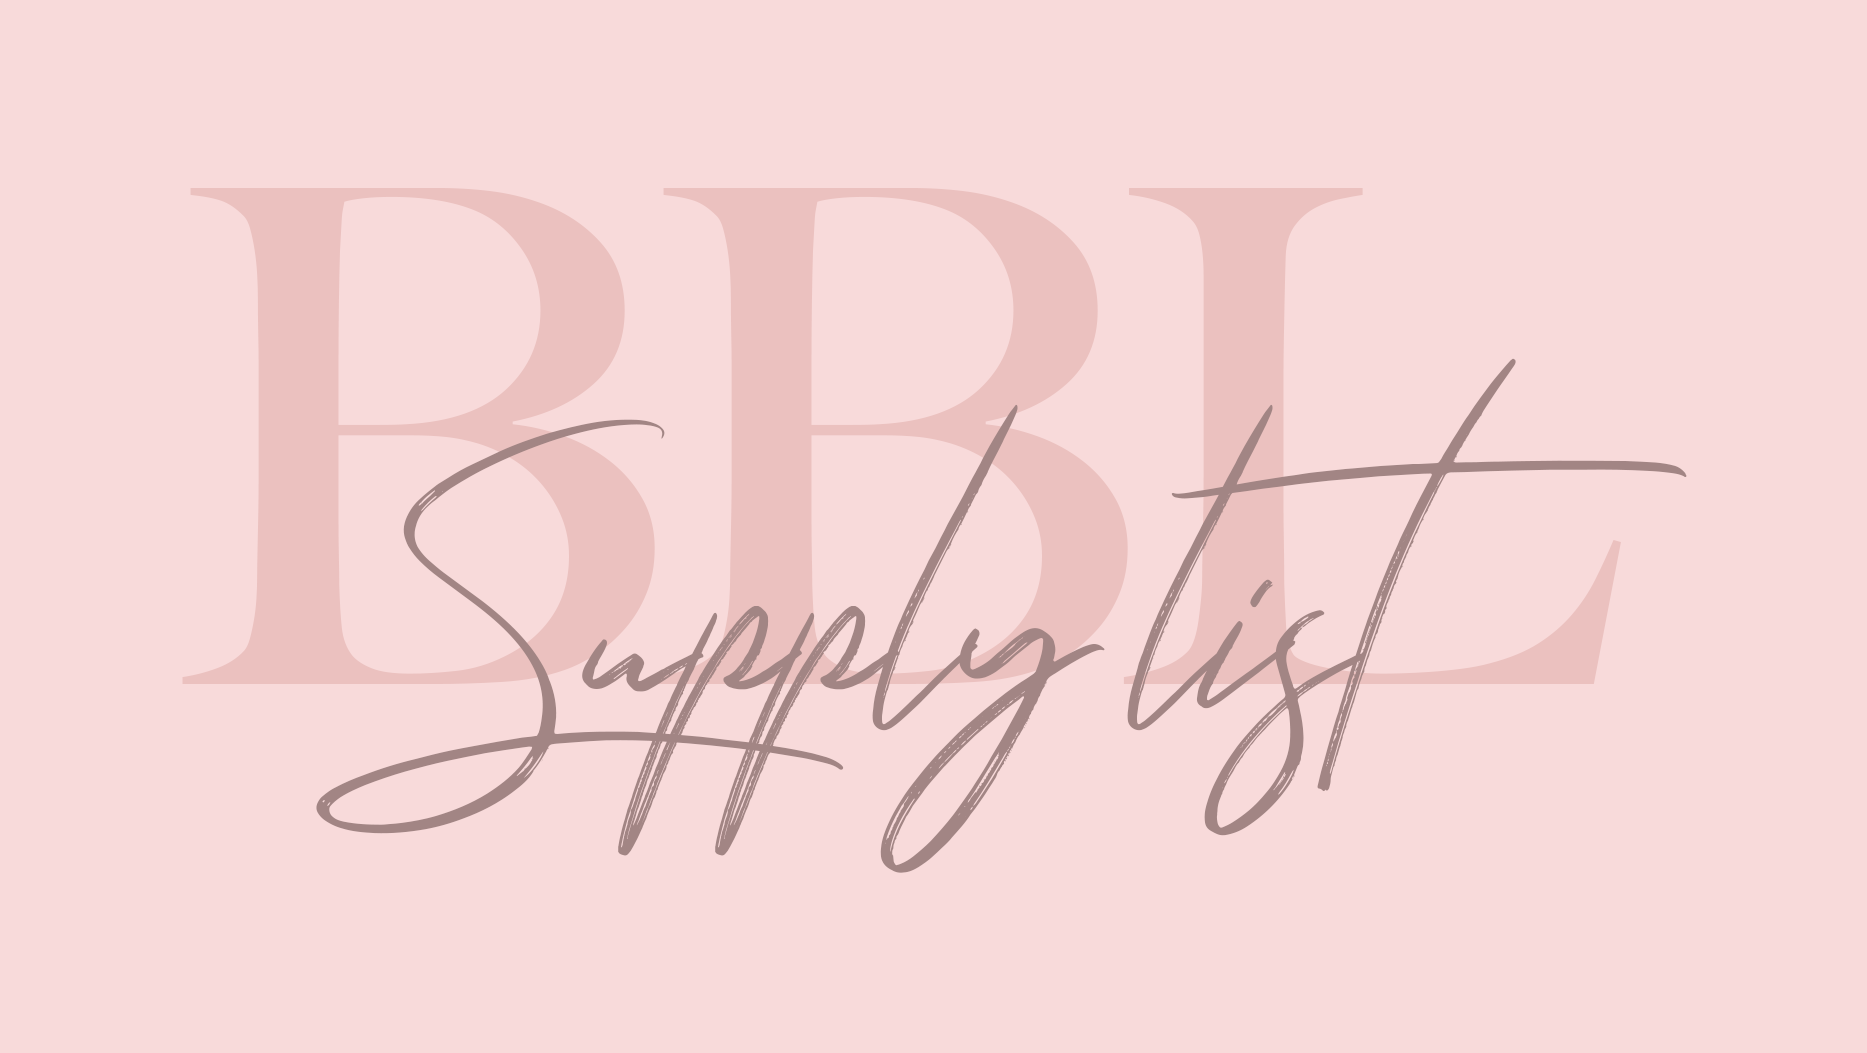 BBL Supply List: What You Actually Need